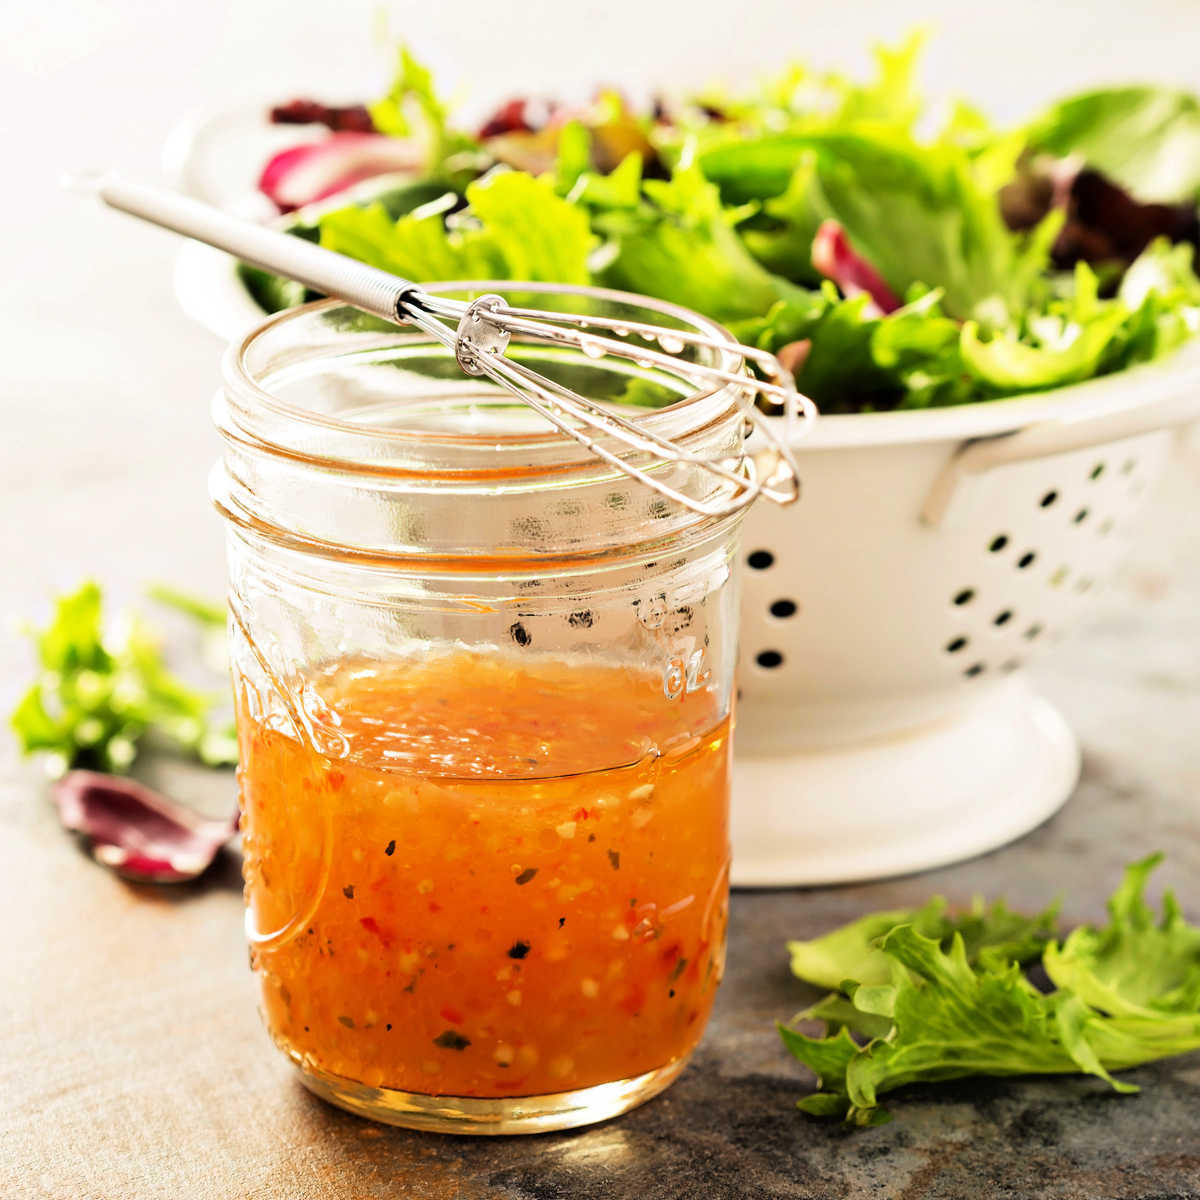 Fresh salad greens in a white enamel colander and a canning jar full of fresh italian dressing with a wire whisk resting on the top of the jar.